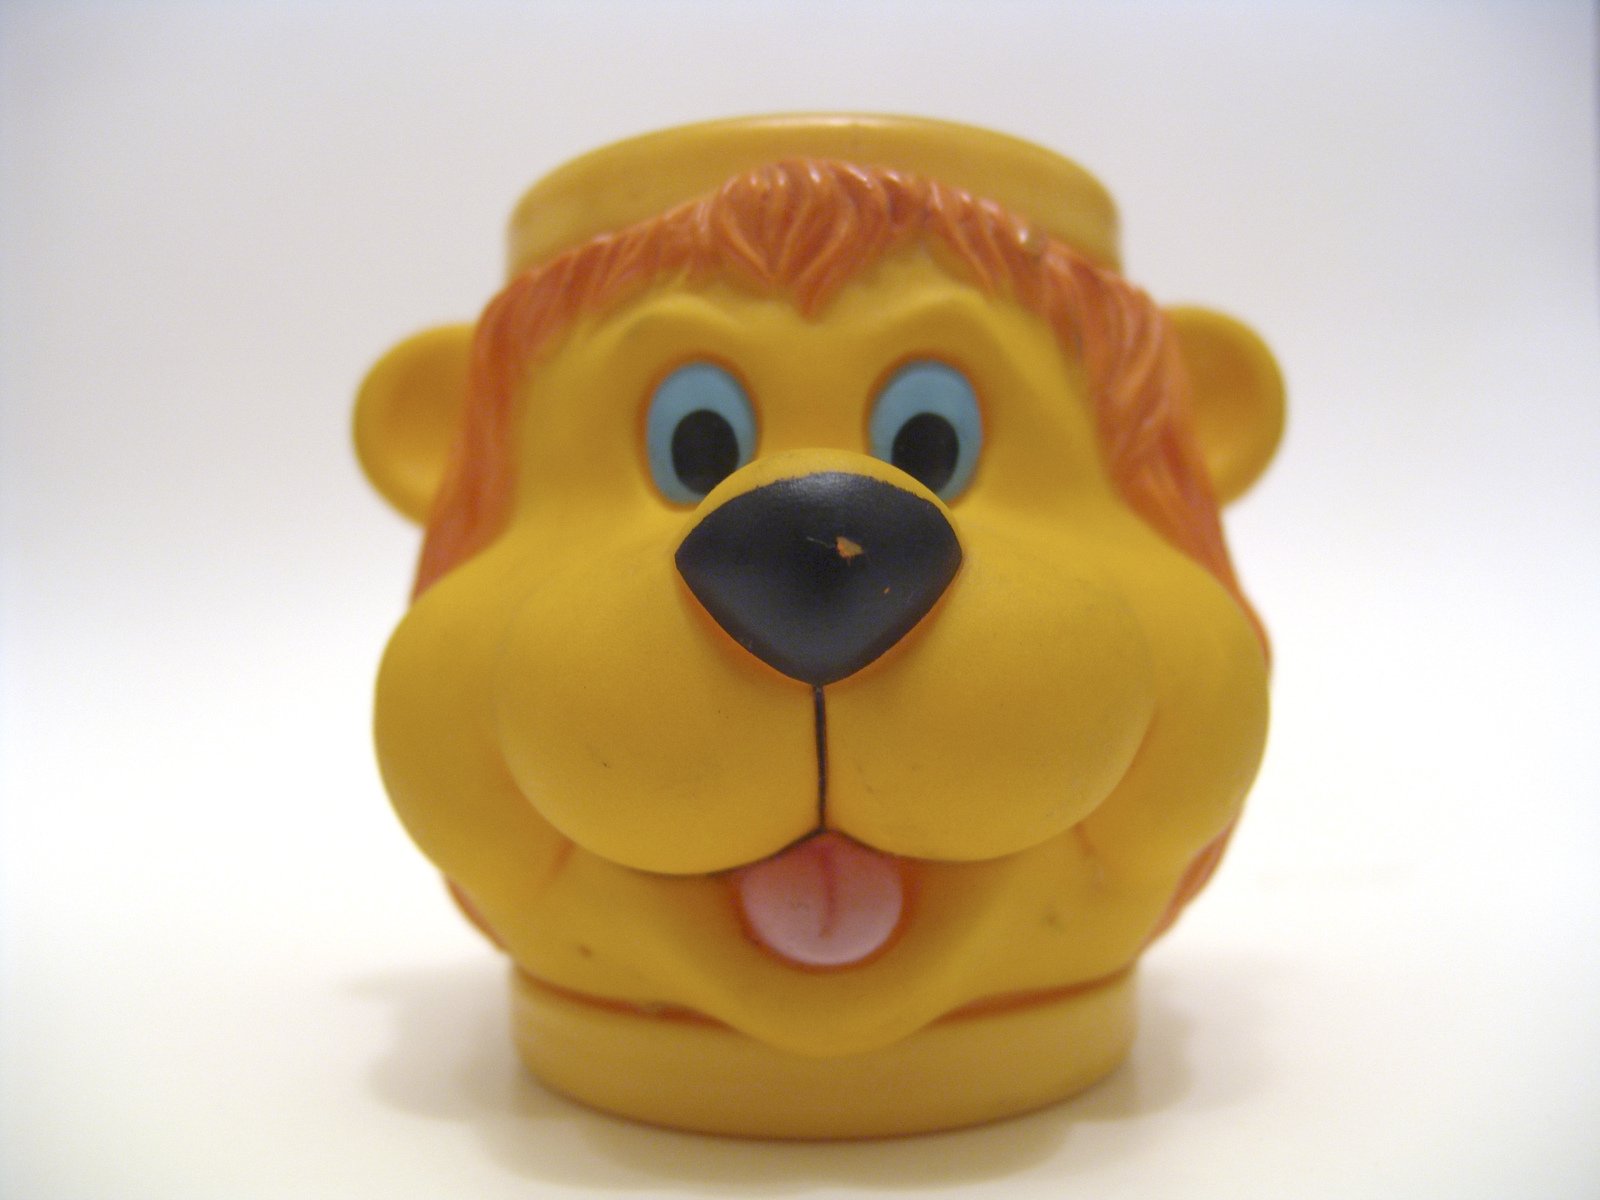 a toy figurine depicting the face of a dog